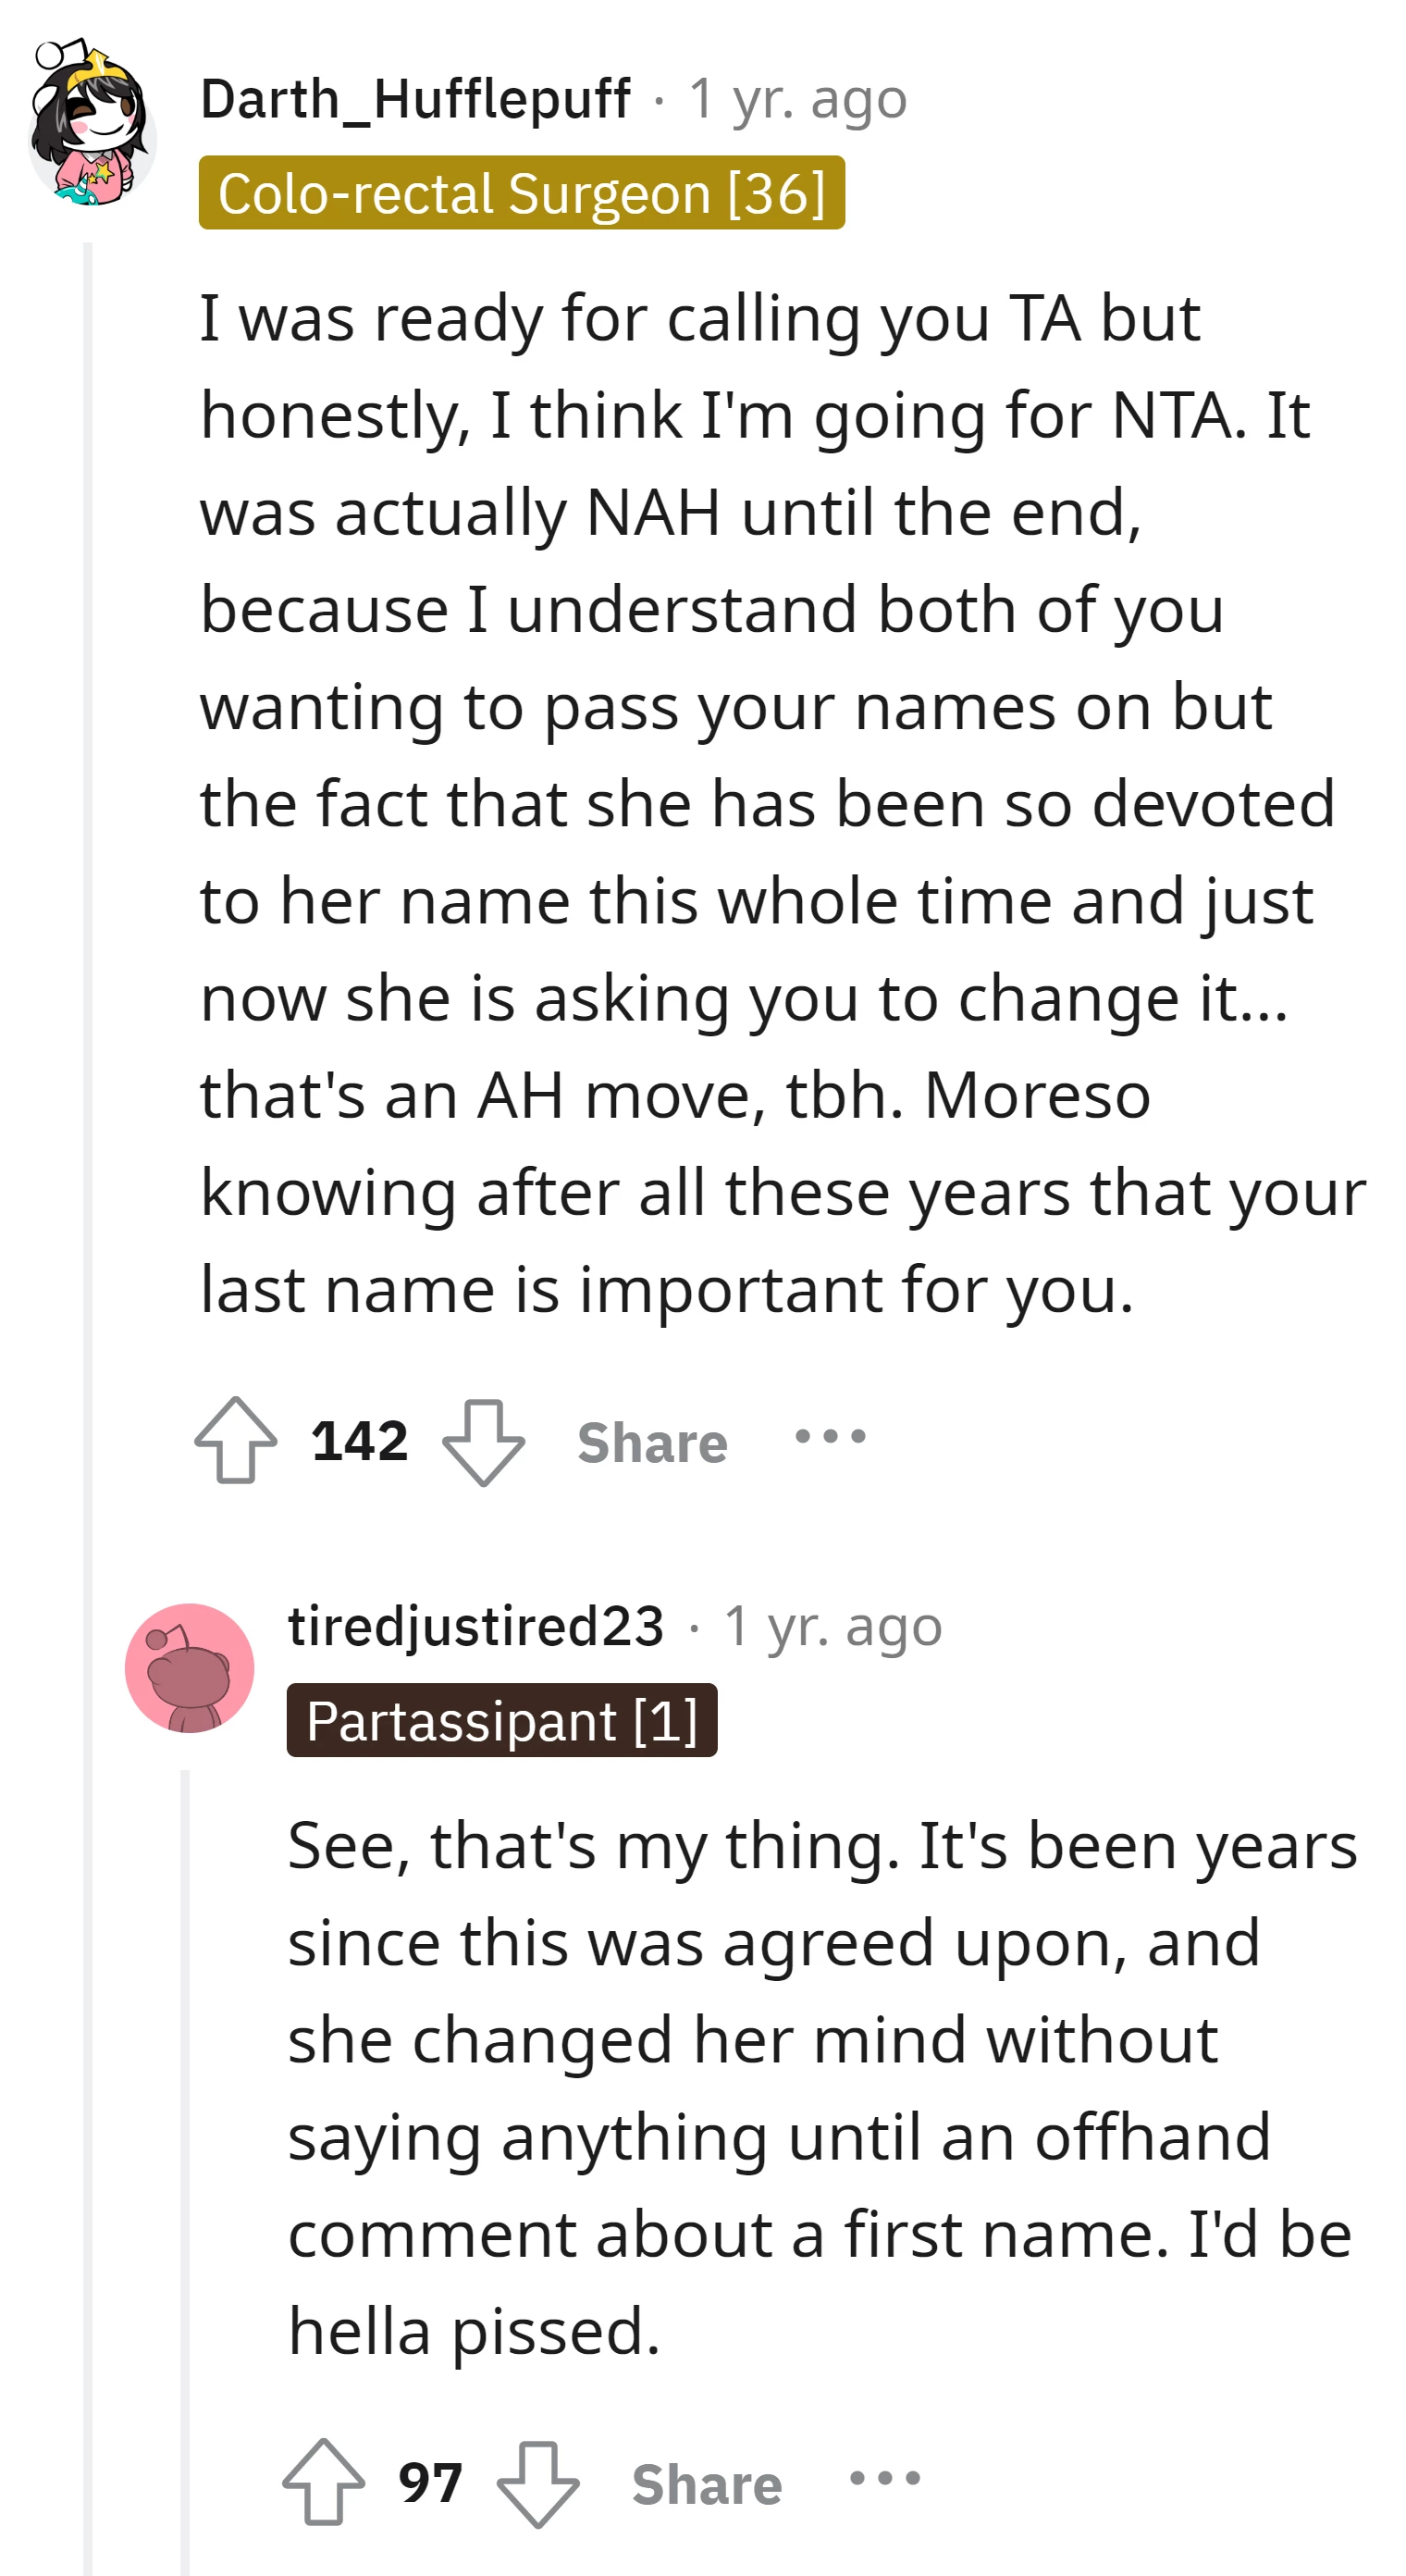 Commenter criticizes the wife's sudden change and request for the OP to alter his last name